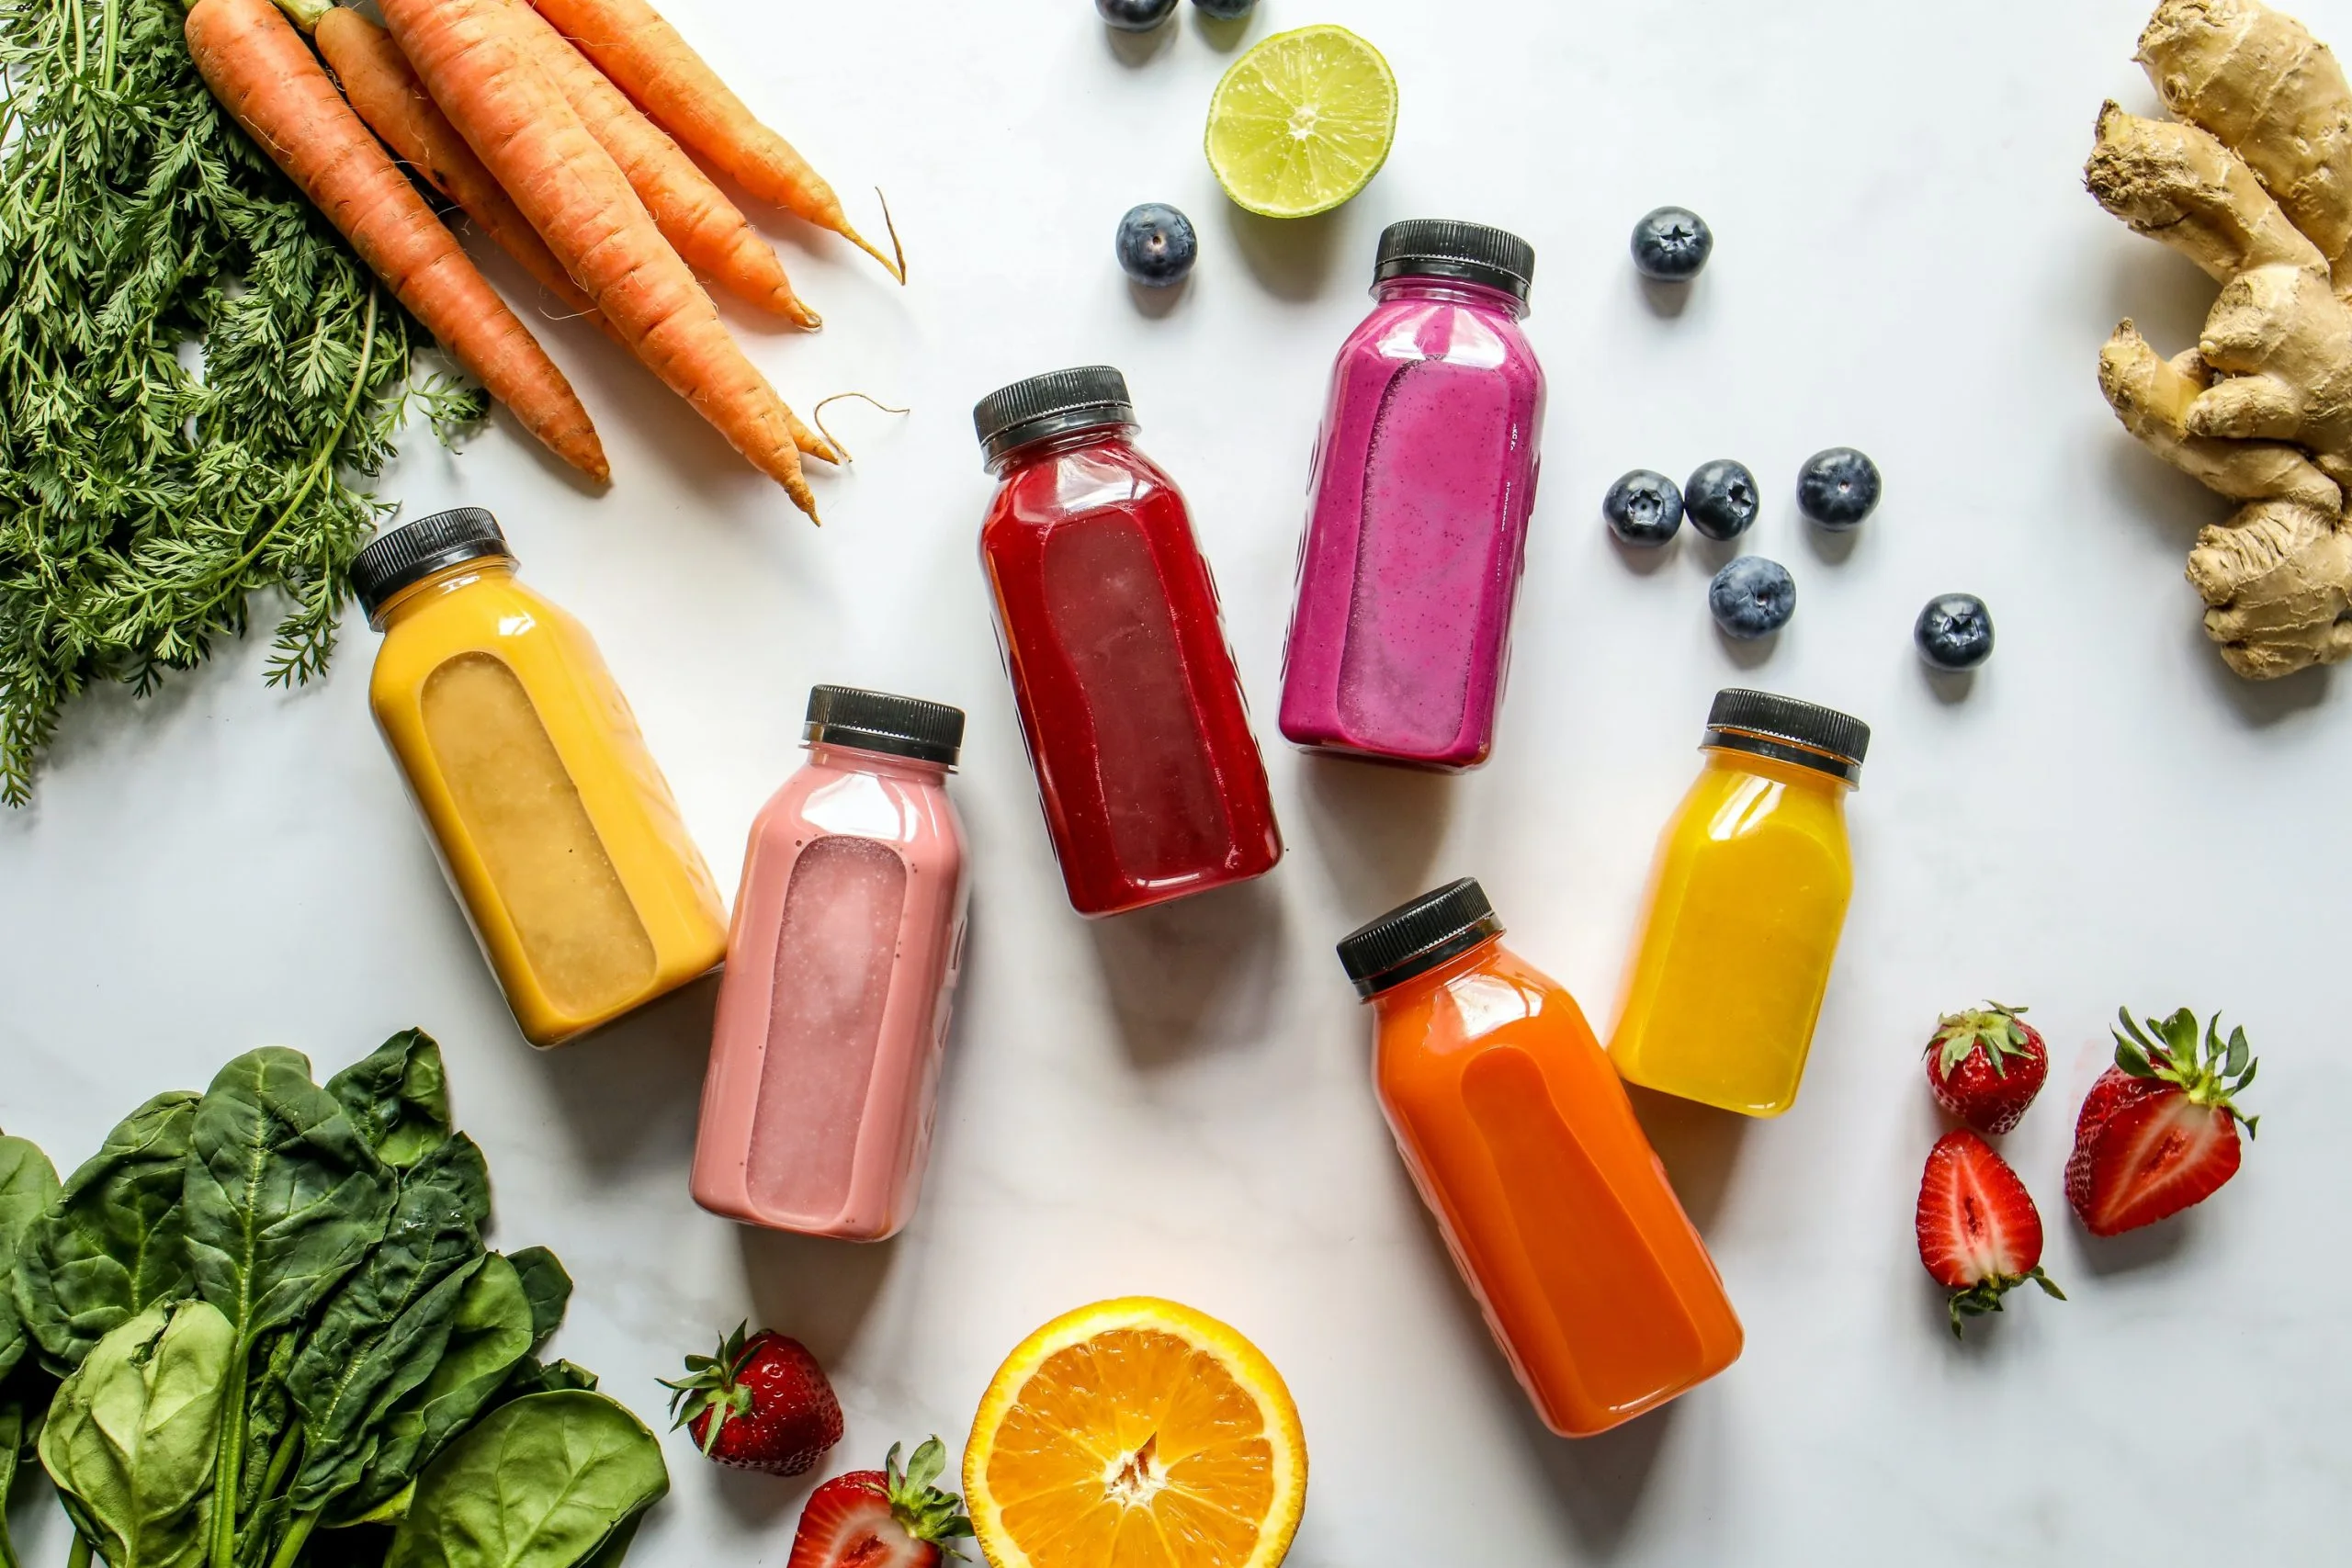 Just How Beneficial Is Juicing For Your Health?